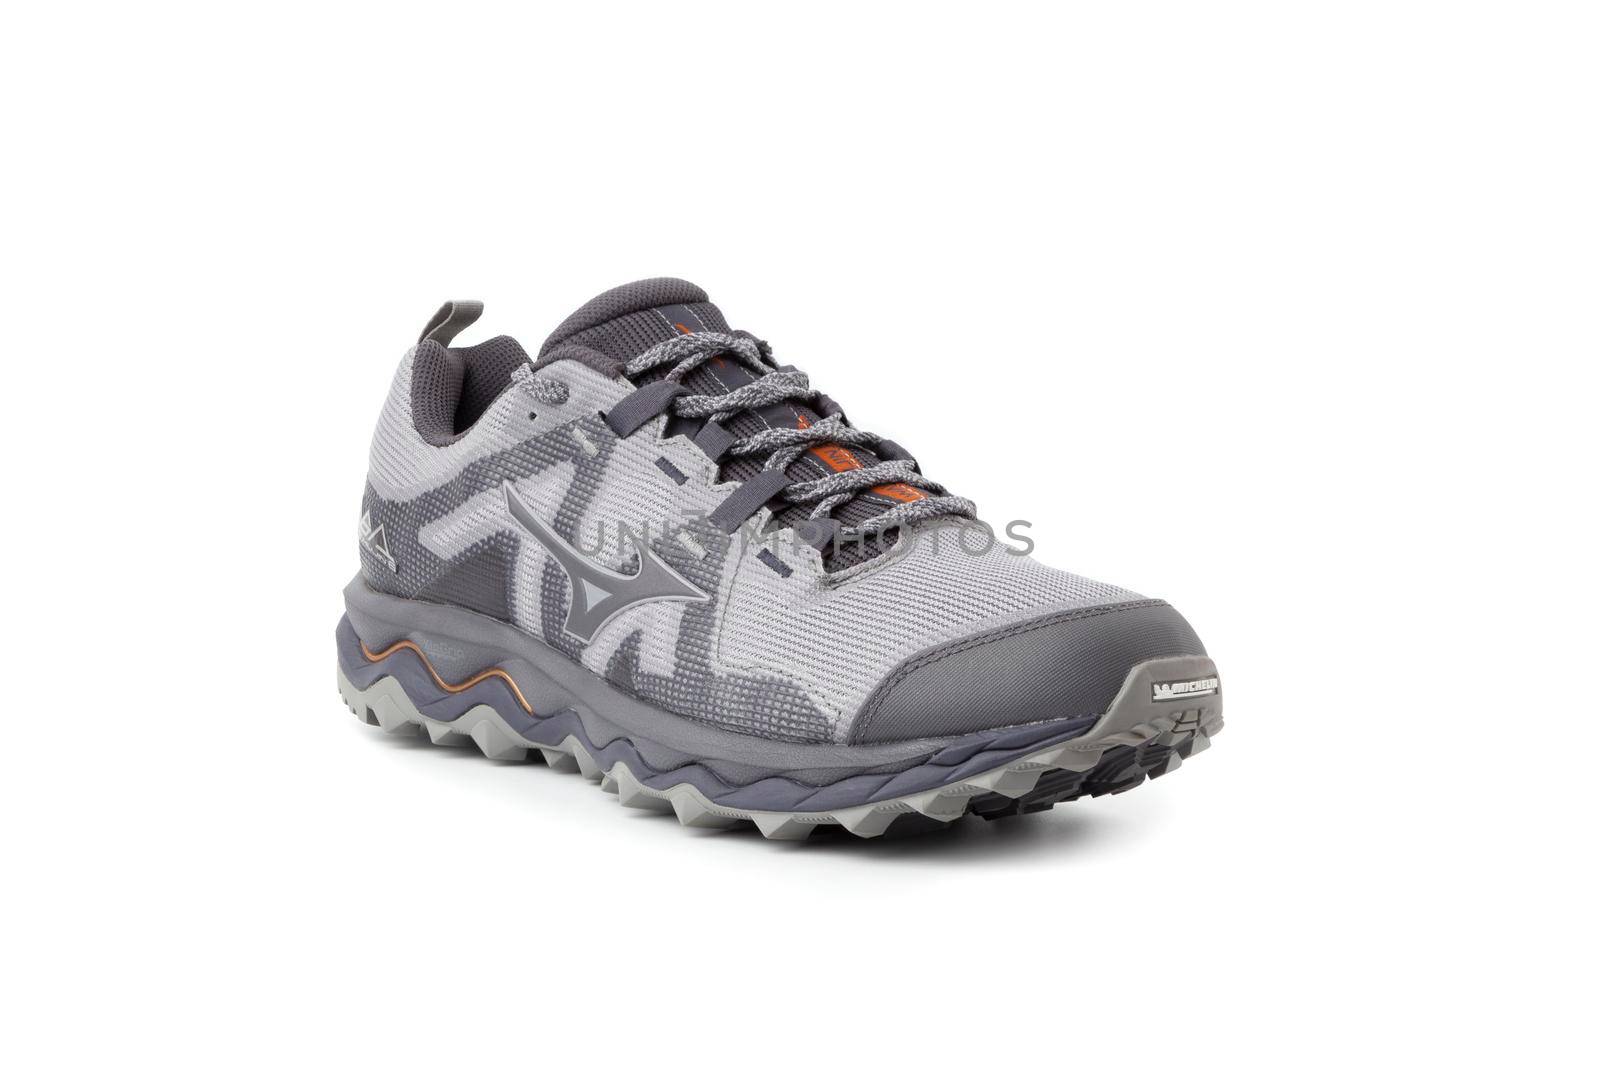 Mizuno Wave Mujin 6 Trail running sneakers close up isolated on a white background by SlayCer